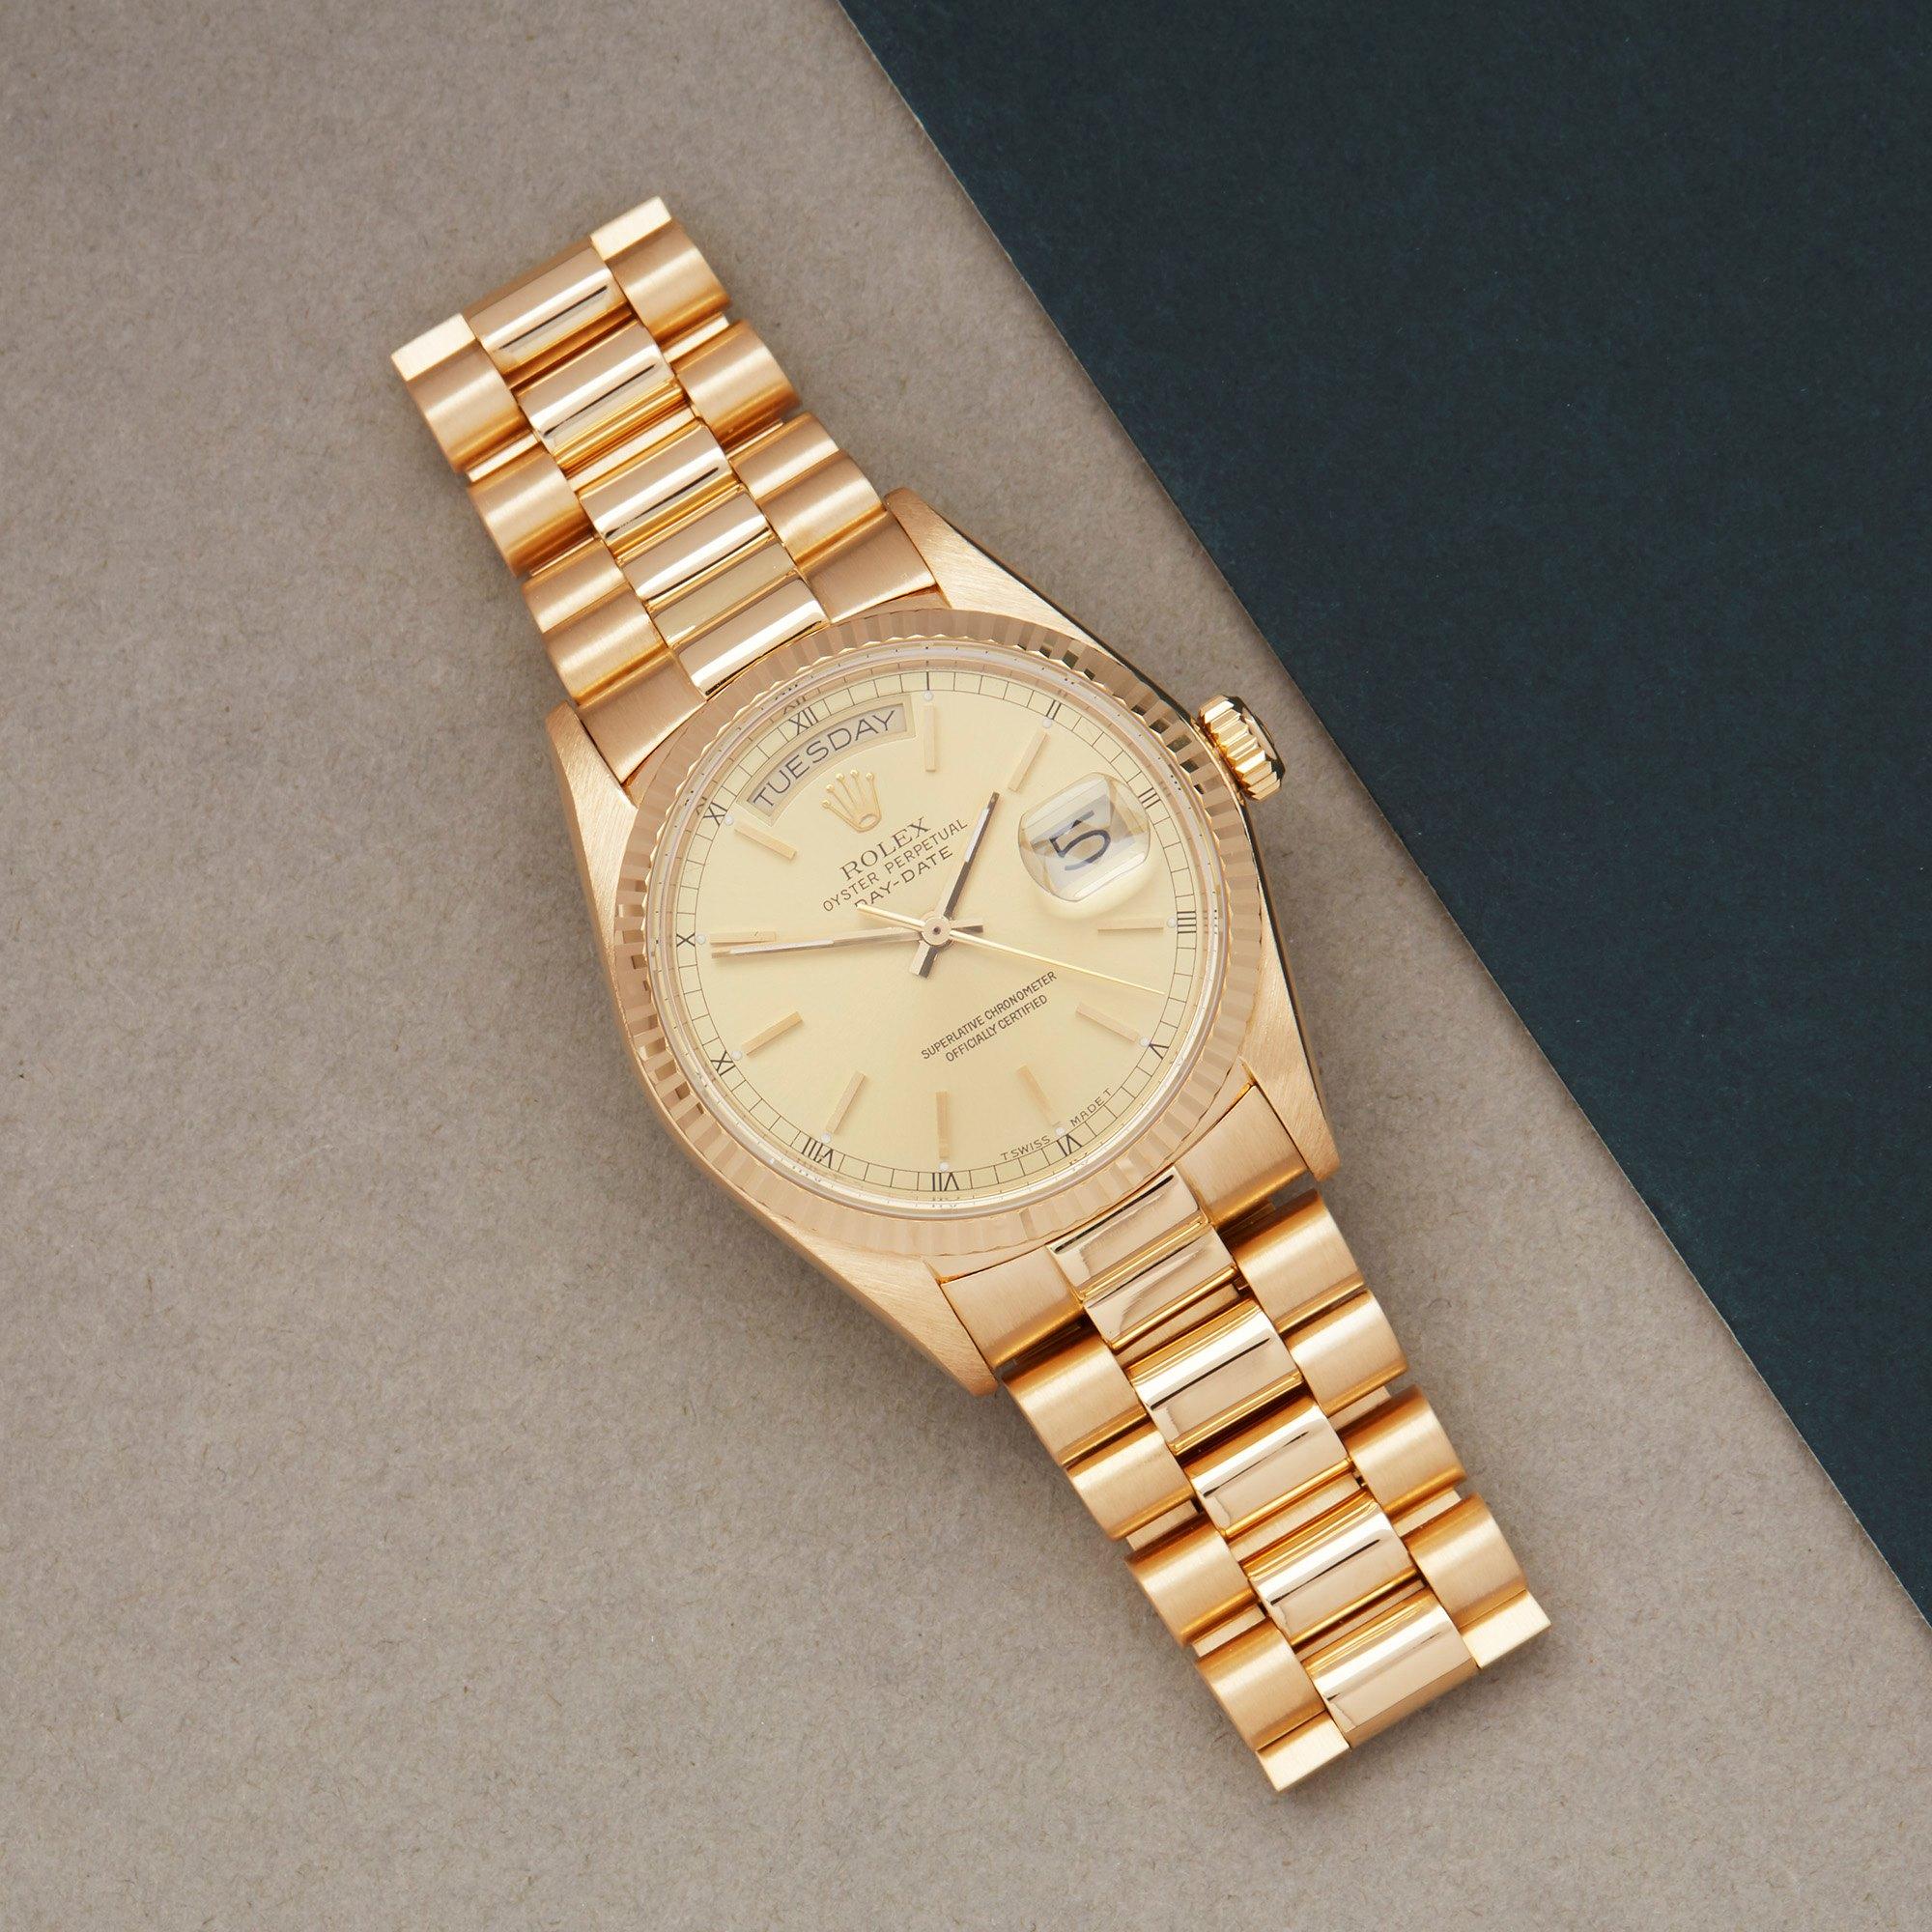 Xupes Reference: W007627
Manufacturer: Rolex
Model: Day-Date
Model Variant: 36
Model Number: 18038
Age: 1987
Gender: Men
Complete With: Rolex Box
Dial: Gold/Champange Baton
Glass: Sapphire Crystal
Case Size: 36mm
Case Material: Yellow Gold
Strap